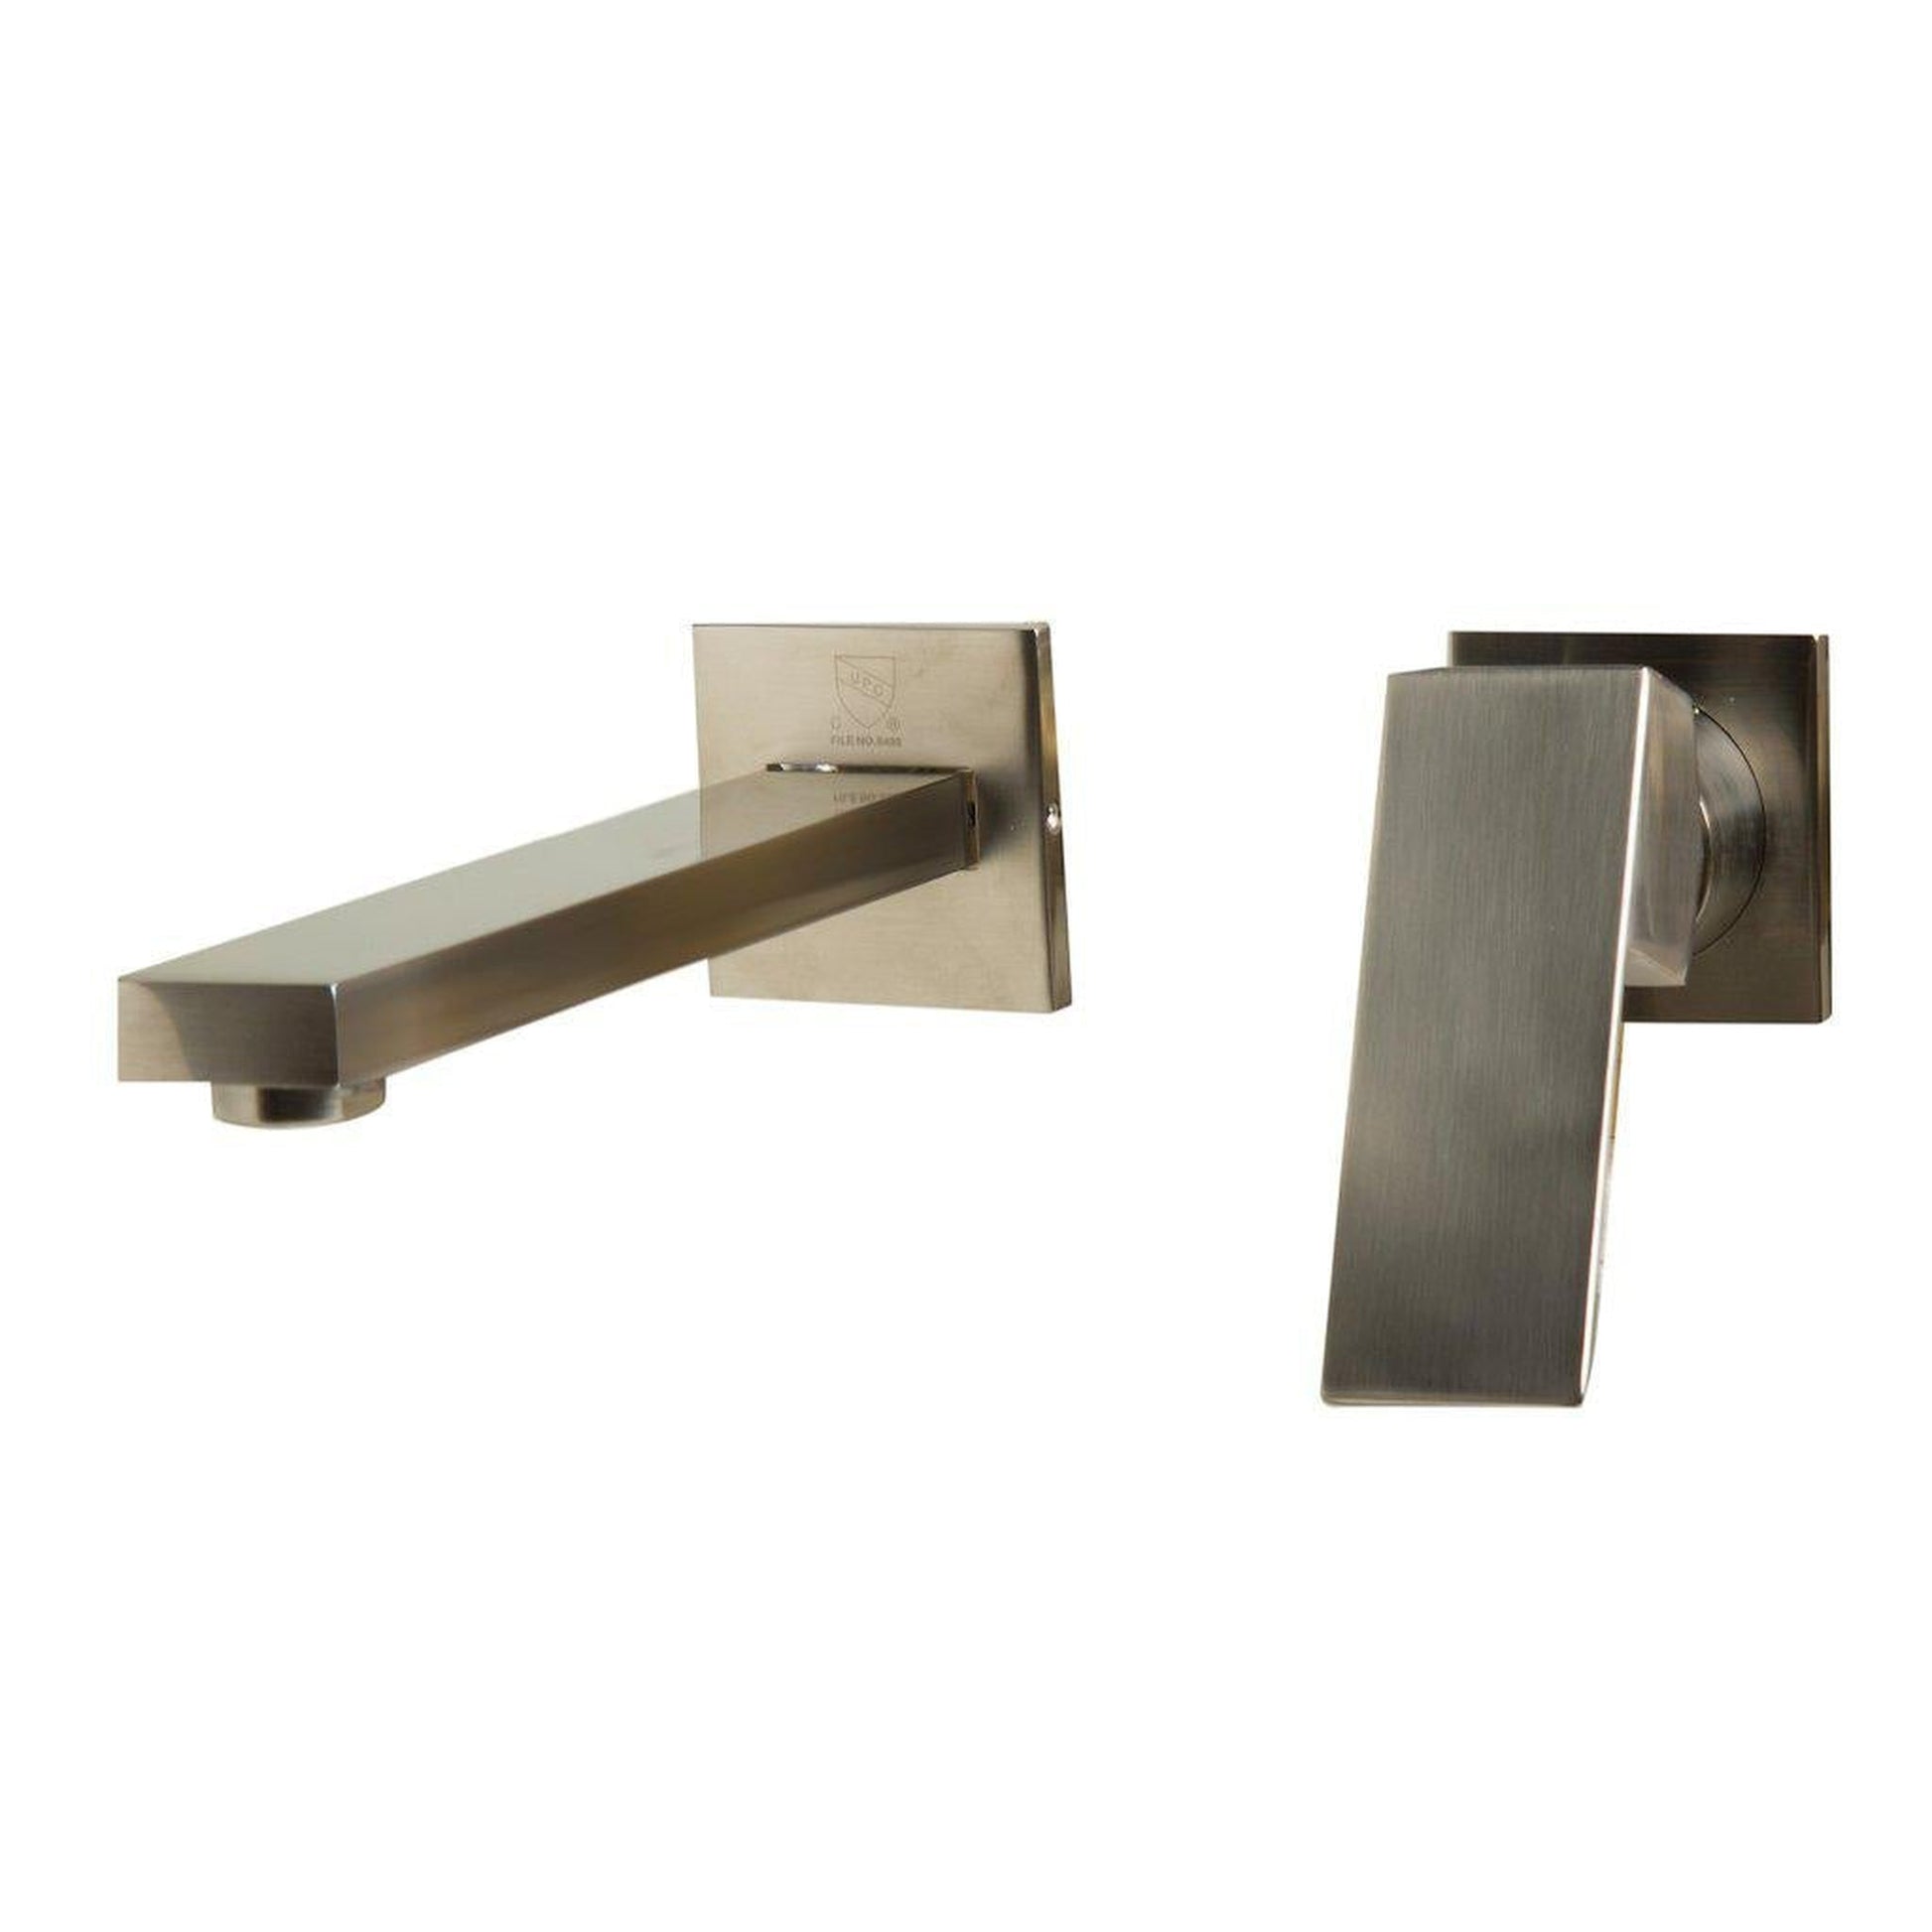 ALFI Brand AB1468-BN Brushed Nickel Wall-Mounted Square Spout Brass Bathroom Sink Faucet With Single Lever